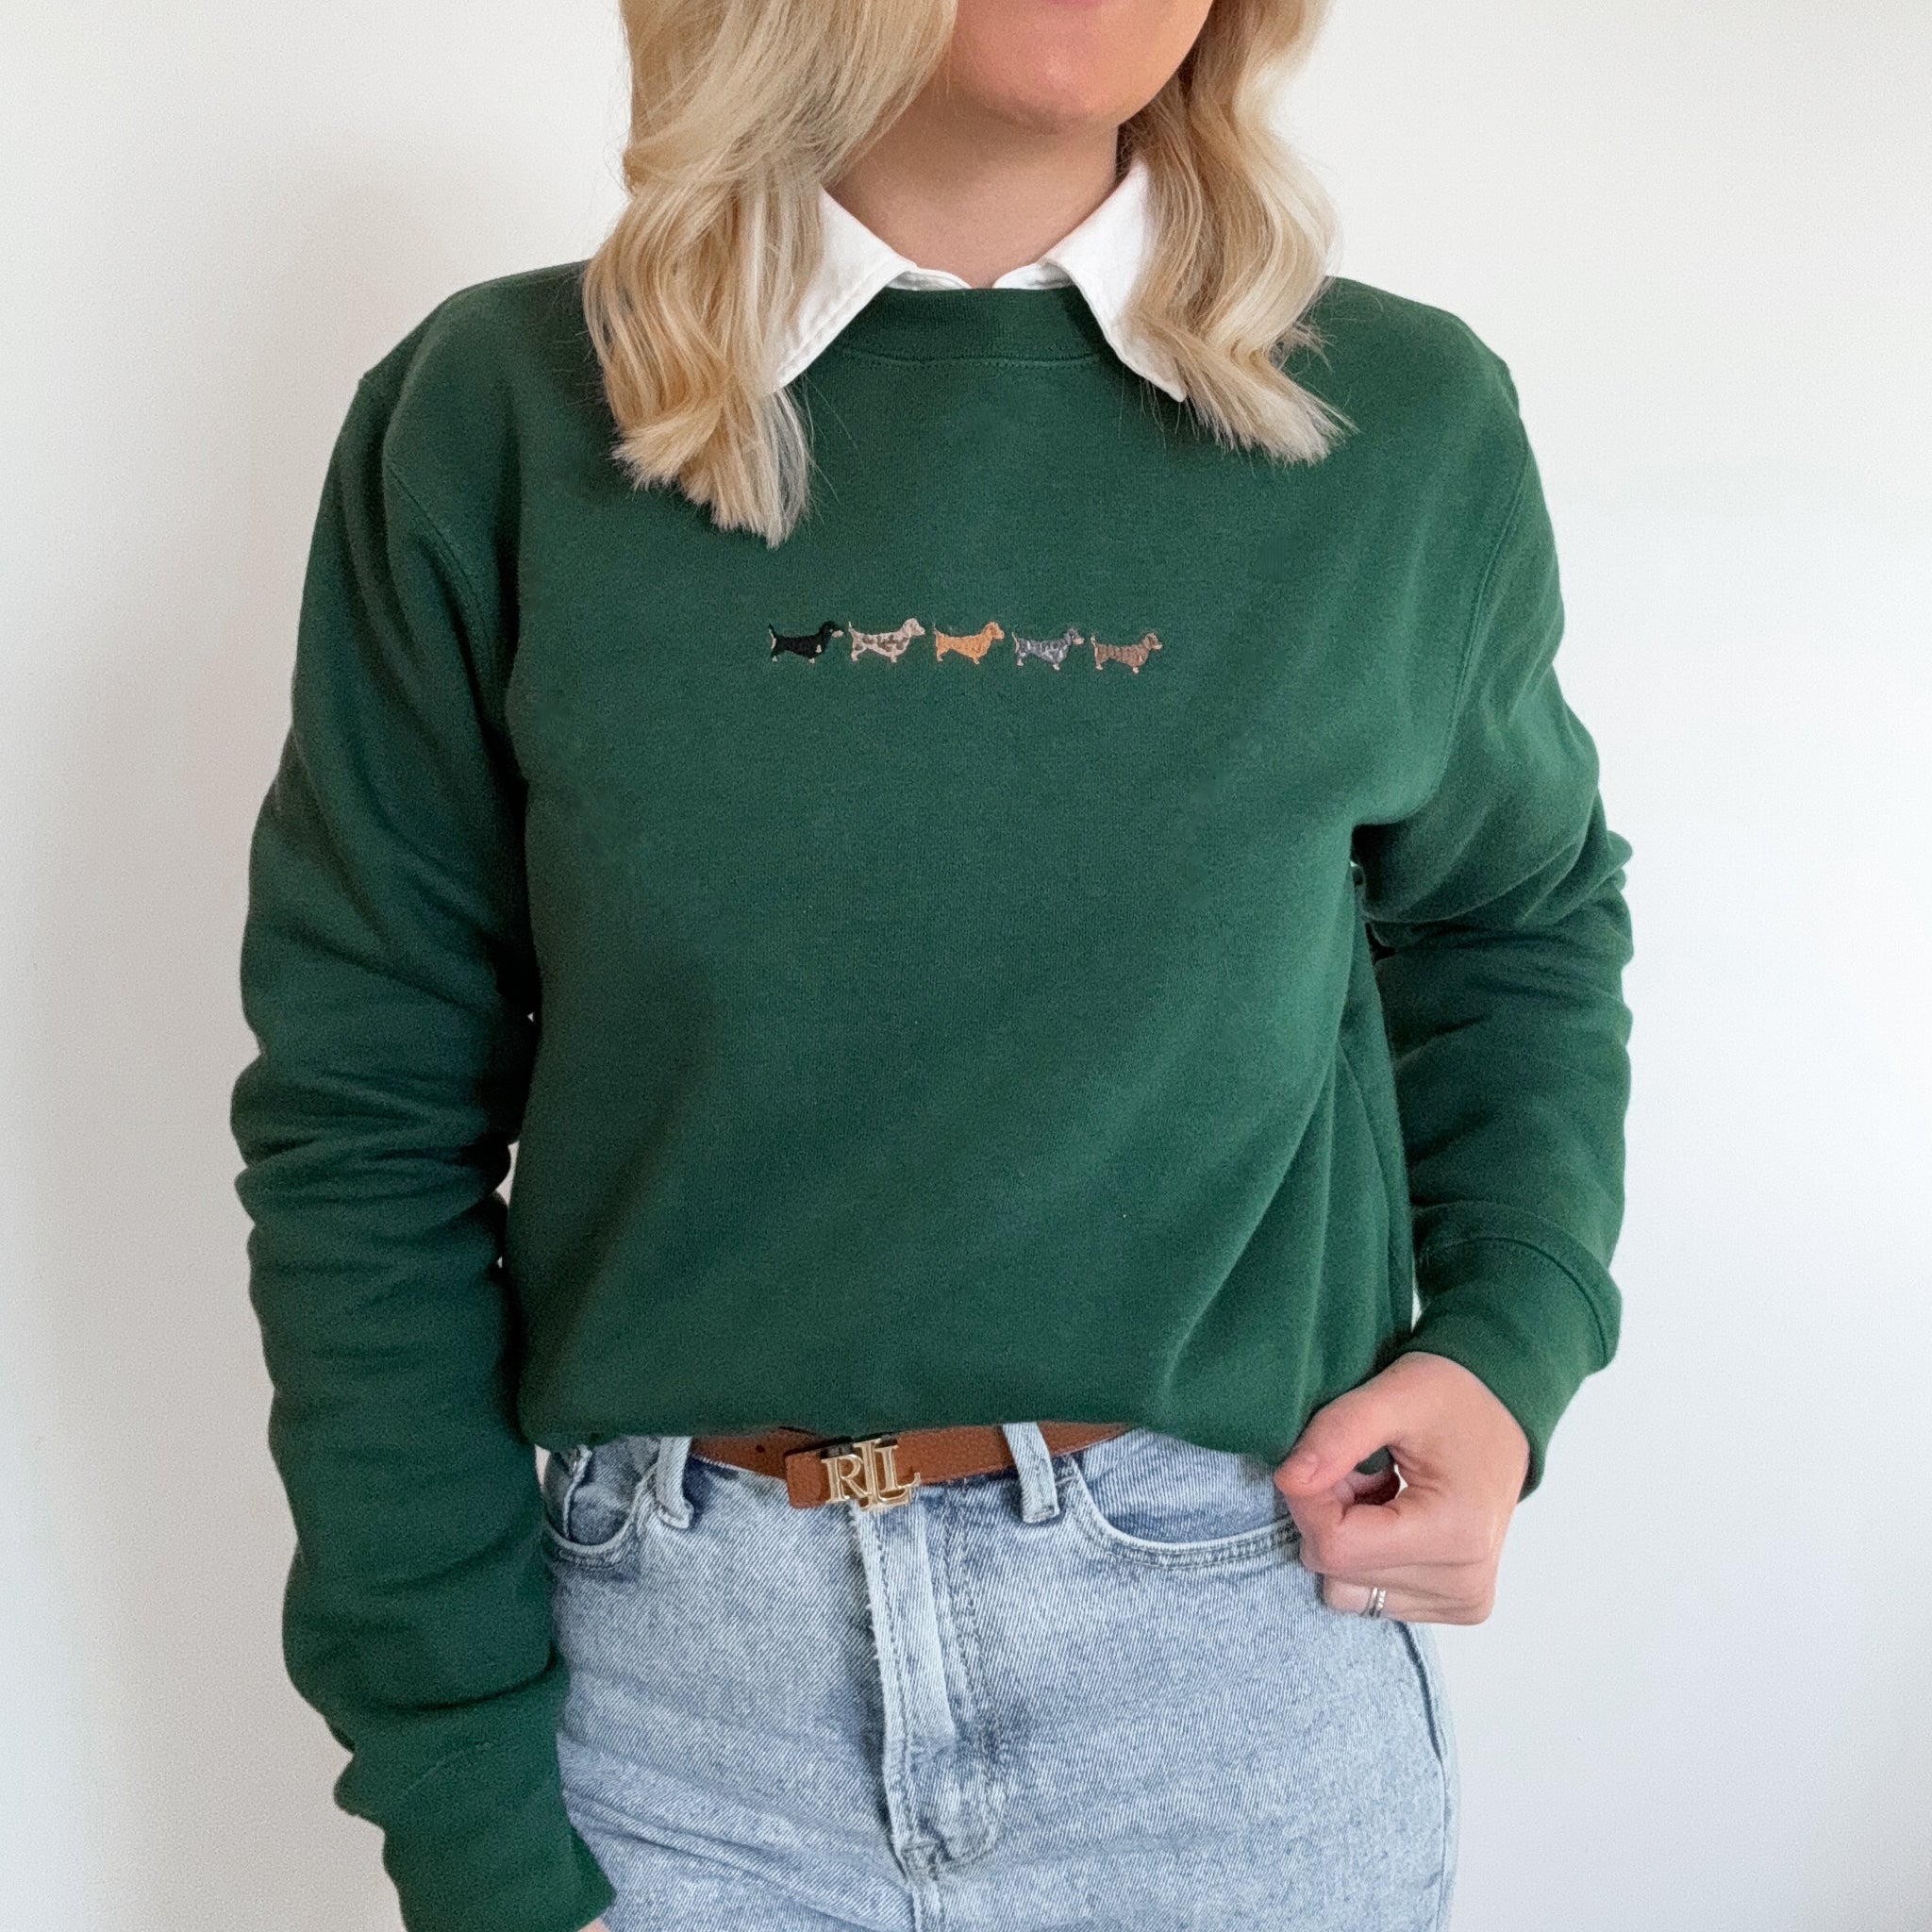 Embroidered Signature Sweatshirt - Dachshunds - Forest Green